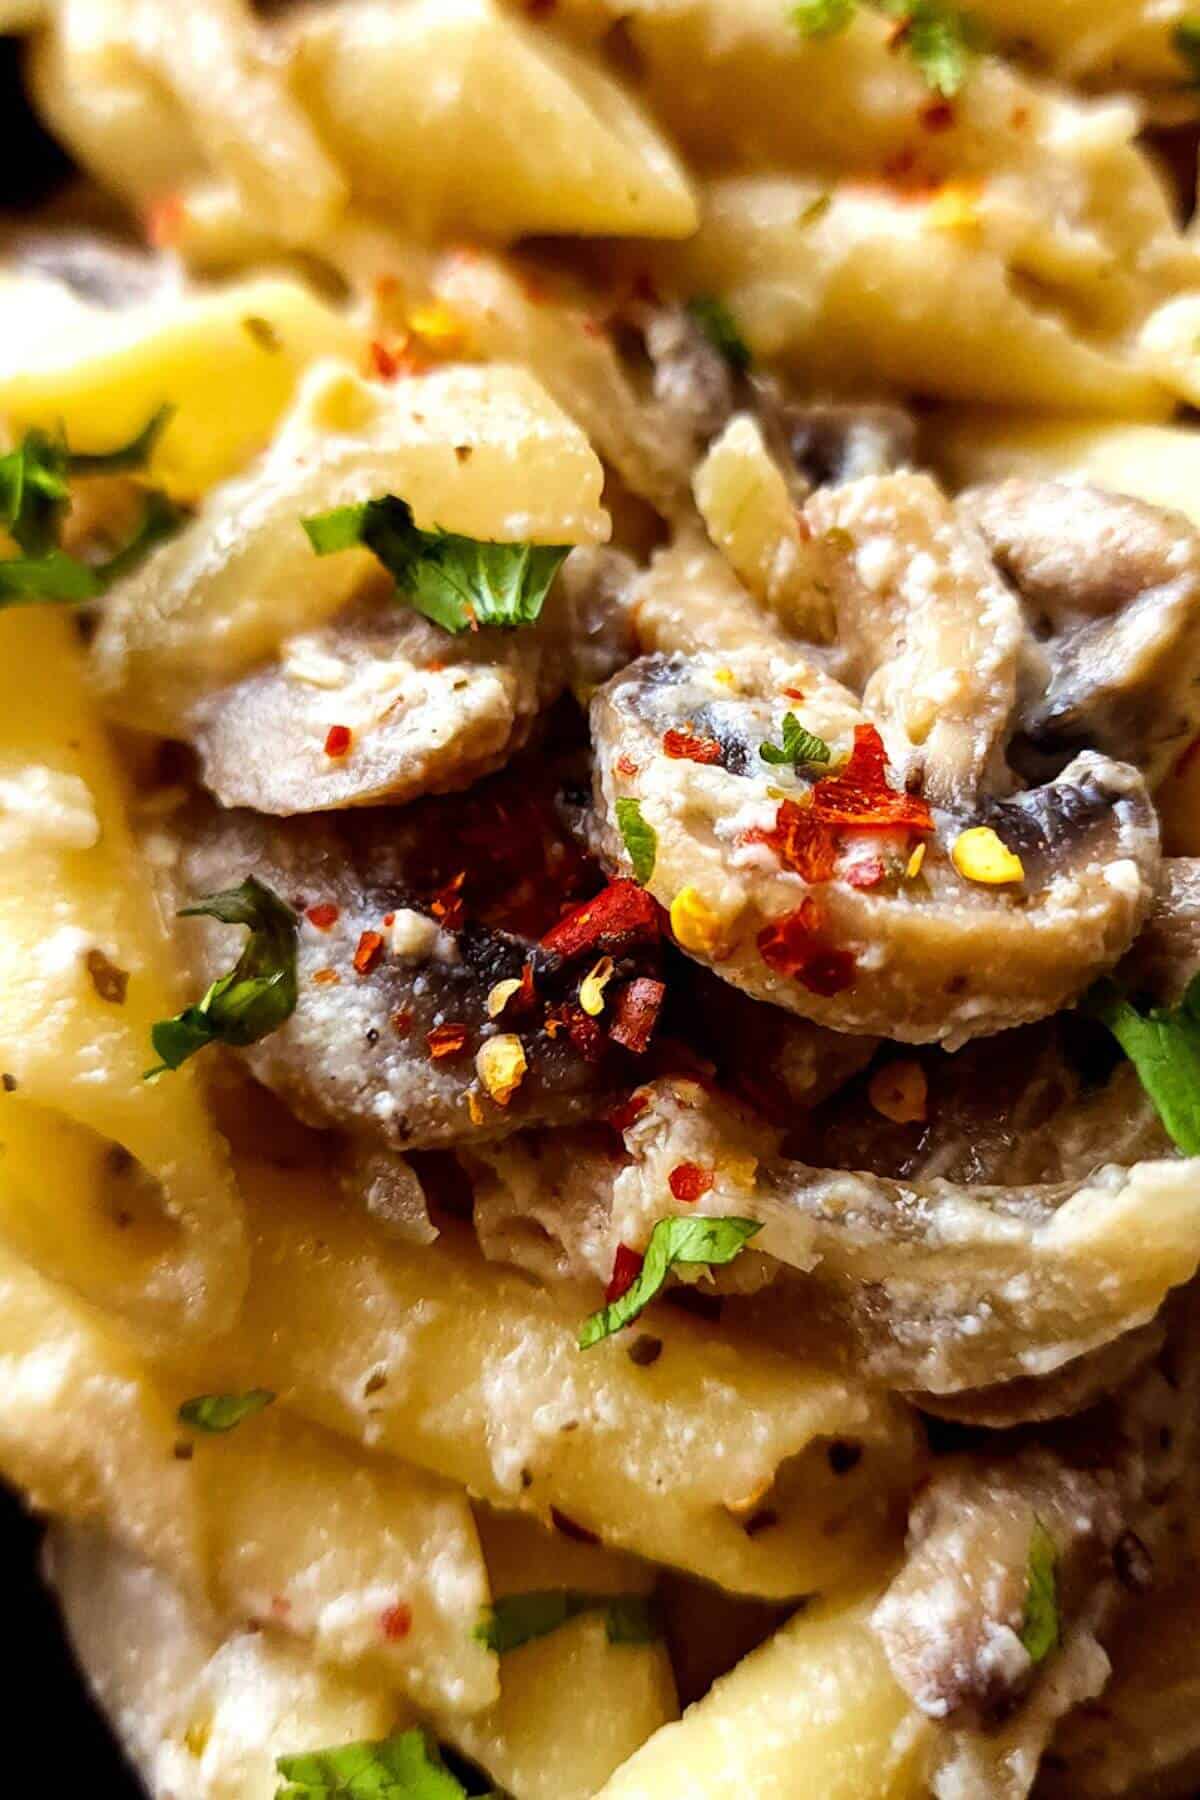 Close up shot of ricotta pasta with mushrooms garnished with chili flakes and parsley.